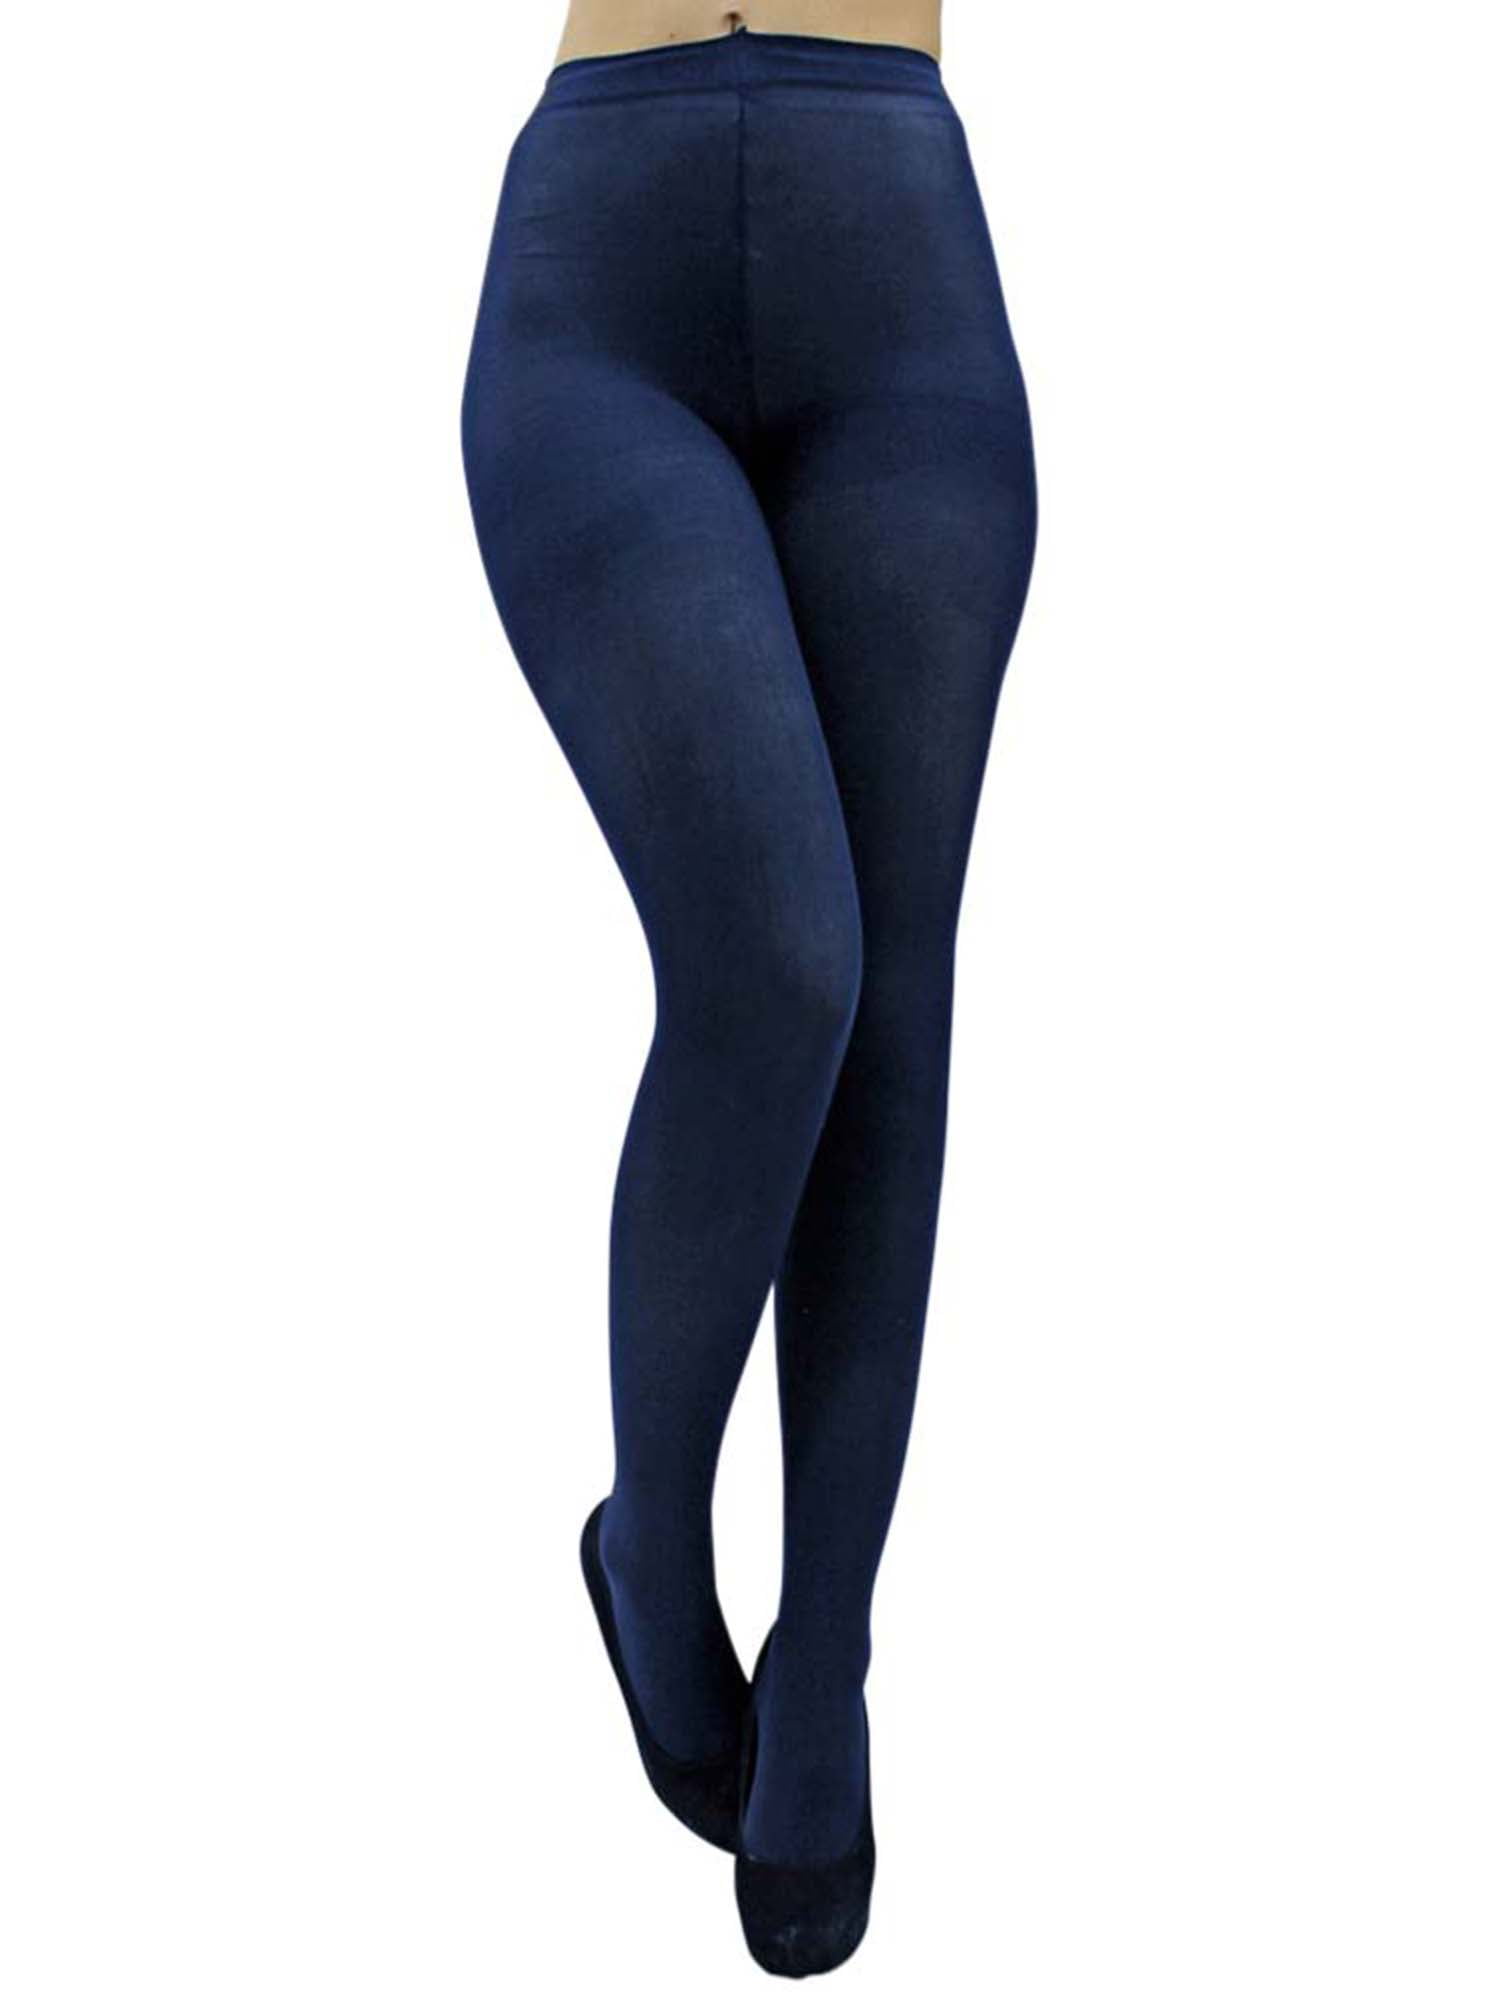 Opaque Navy Blue Stretchy Pantyhose Tights 